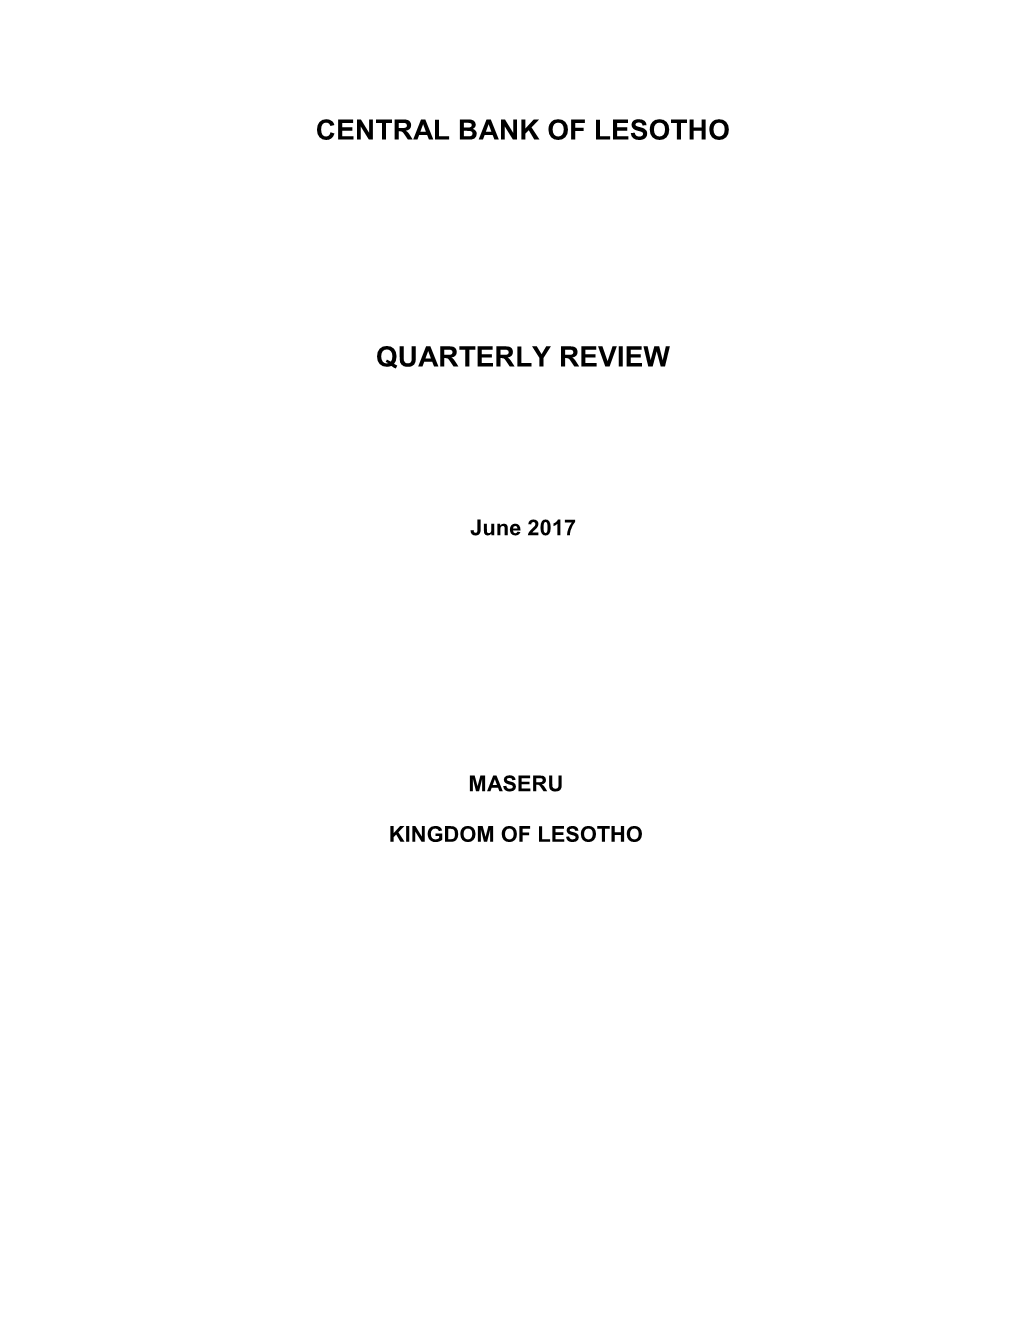 Central Bank of Lesotho Quarterly Review